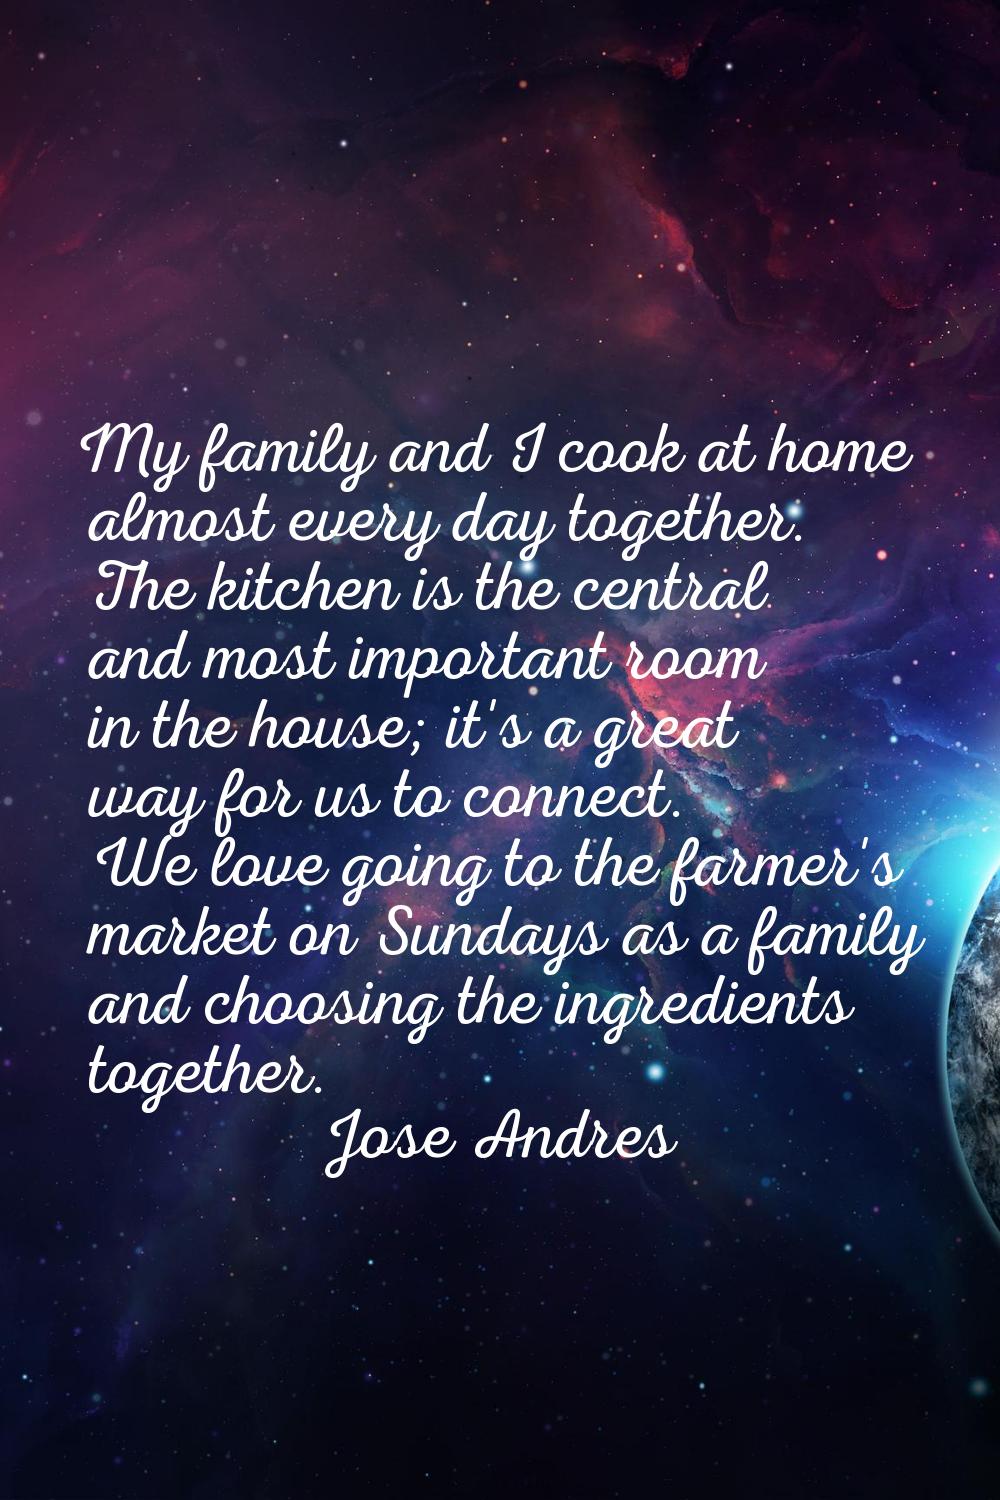 My family and I cook at home almost every day together. The kitchen is the central and most importa